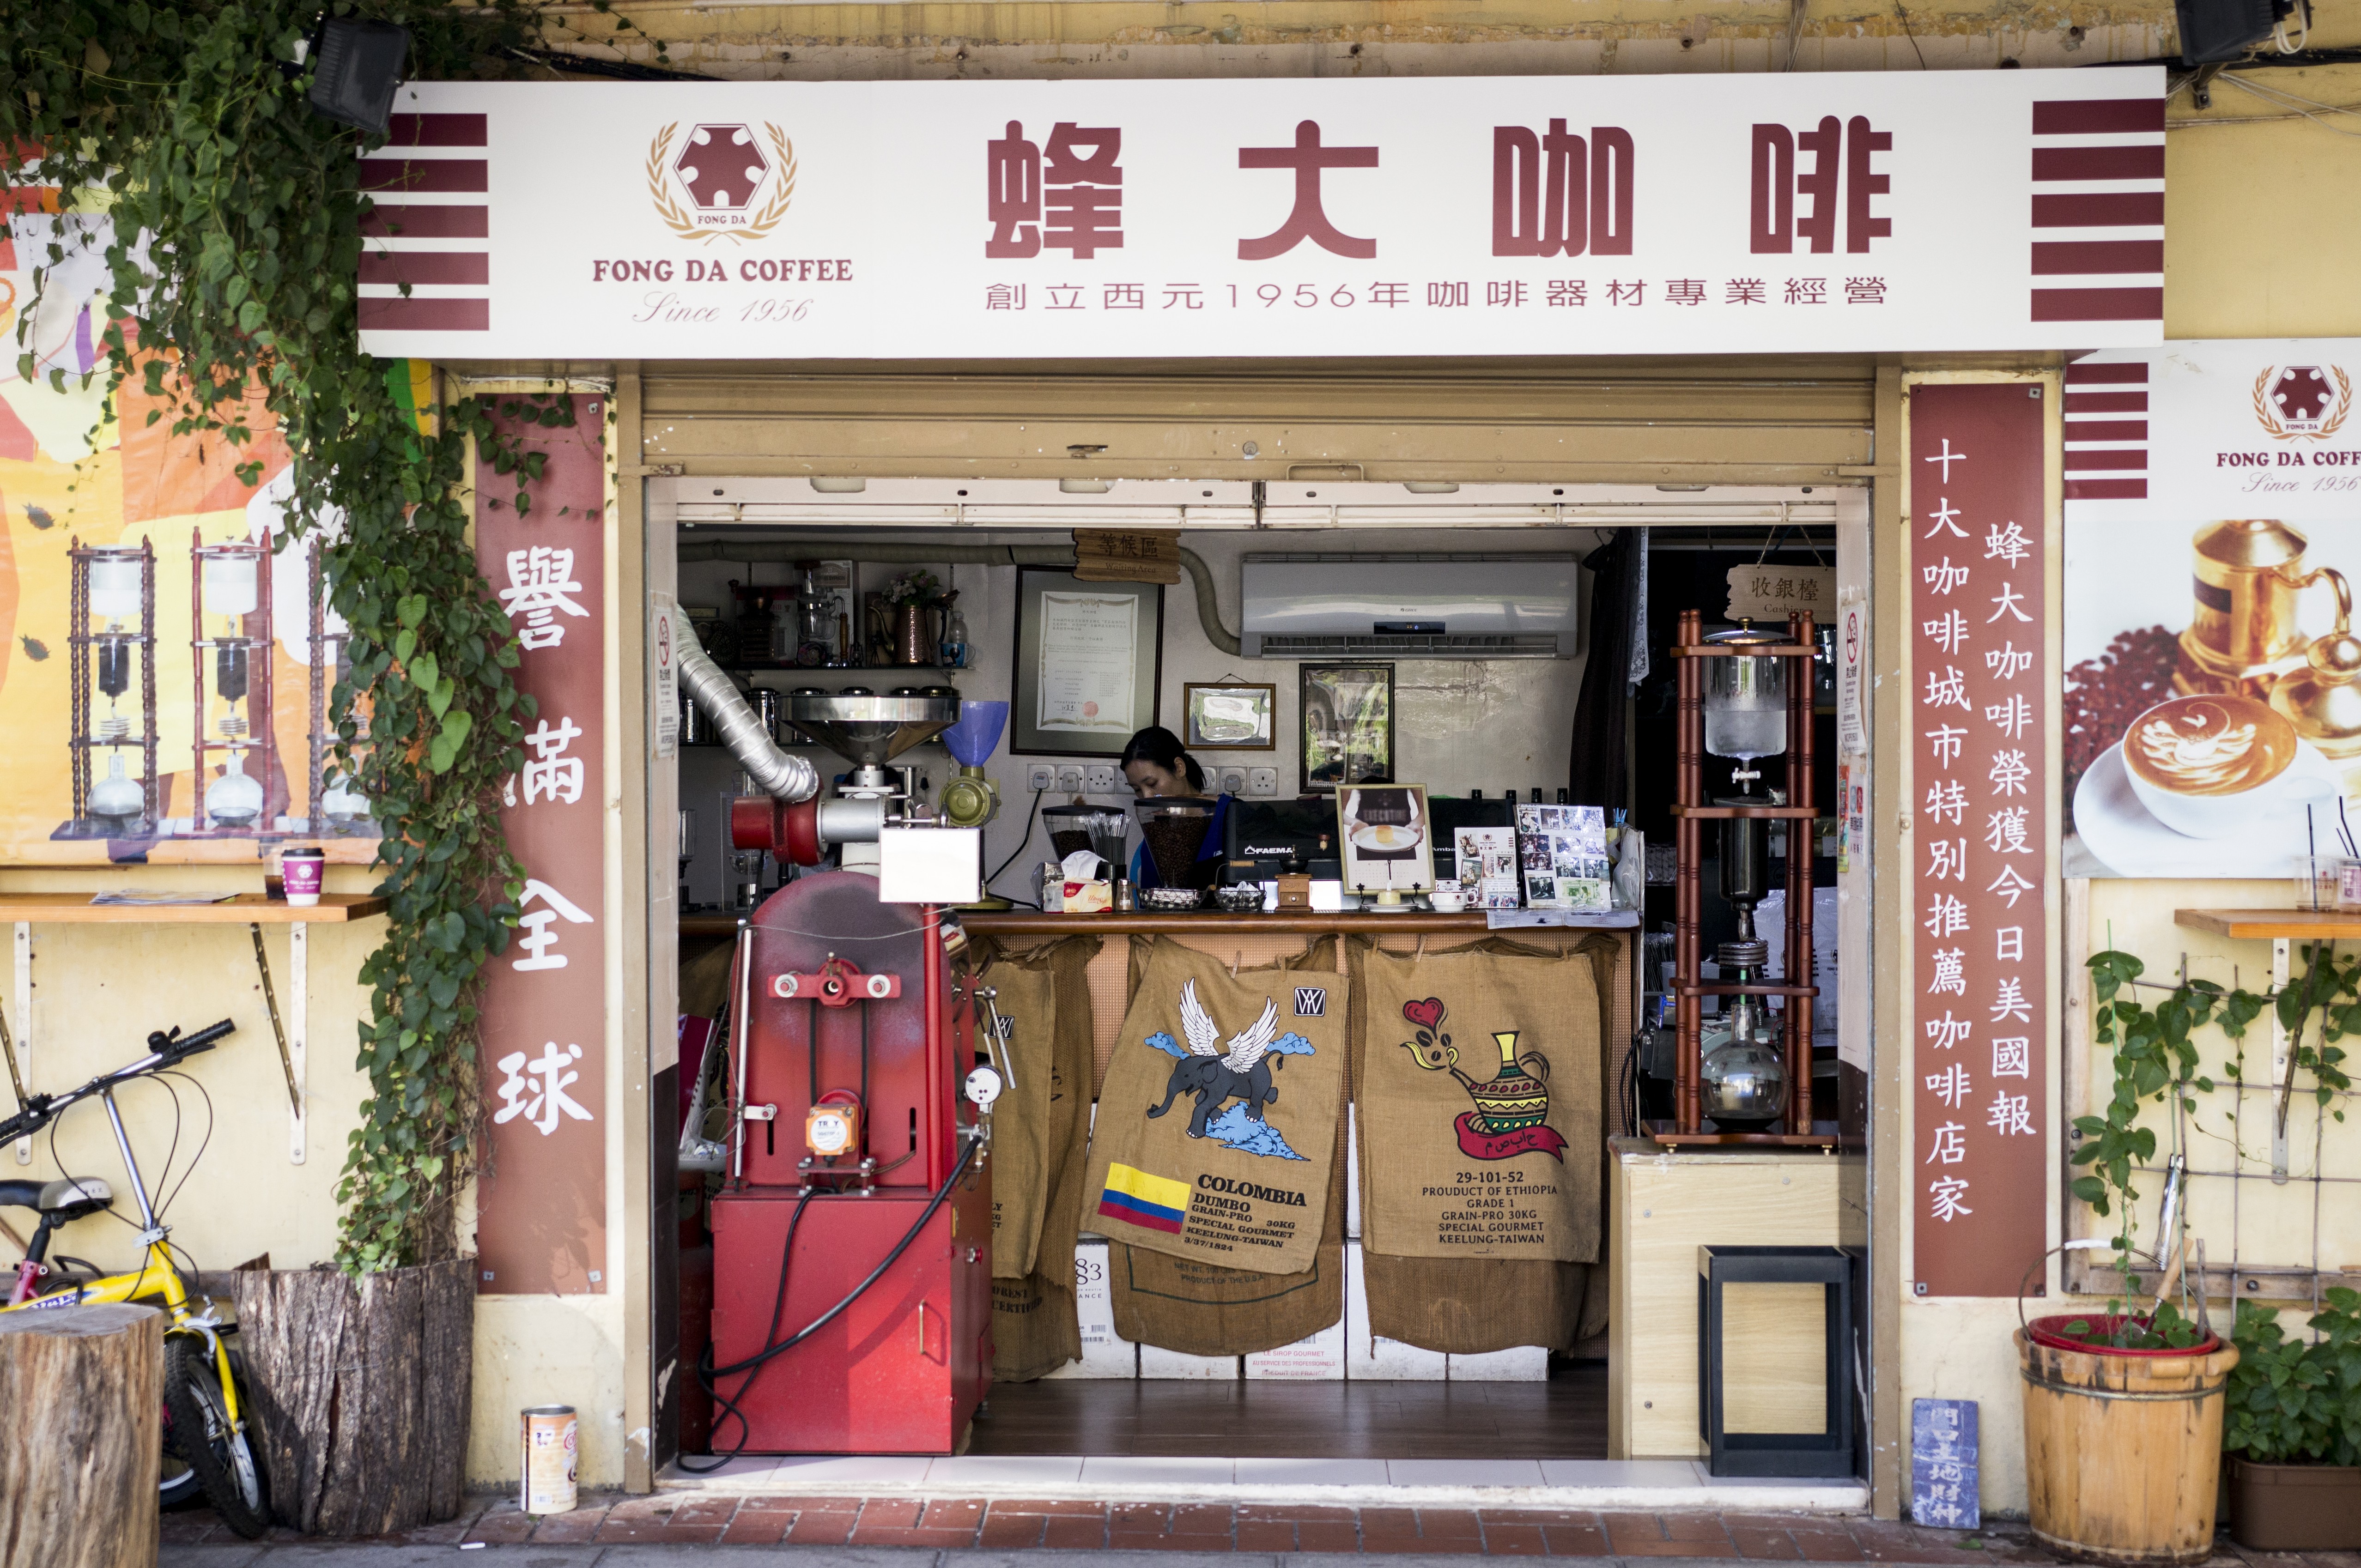 Taipa Village is keeping Macau’s colonial Portuguese history alive. Here is Fong Da, a Taiwanese coffee roastery that is new to the area. Photo: Christopher DeWolf